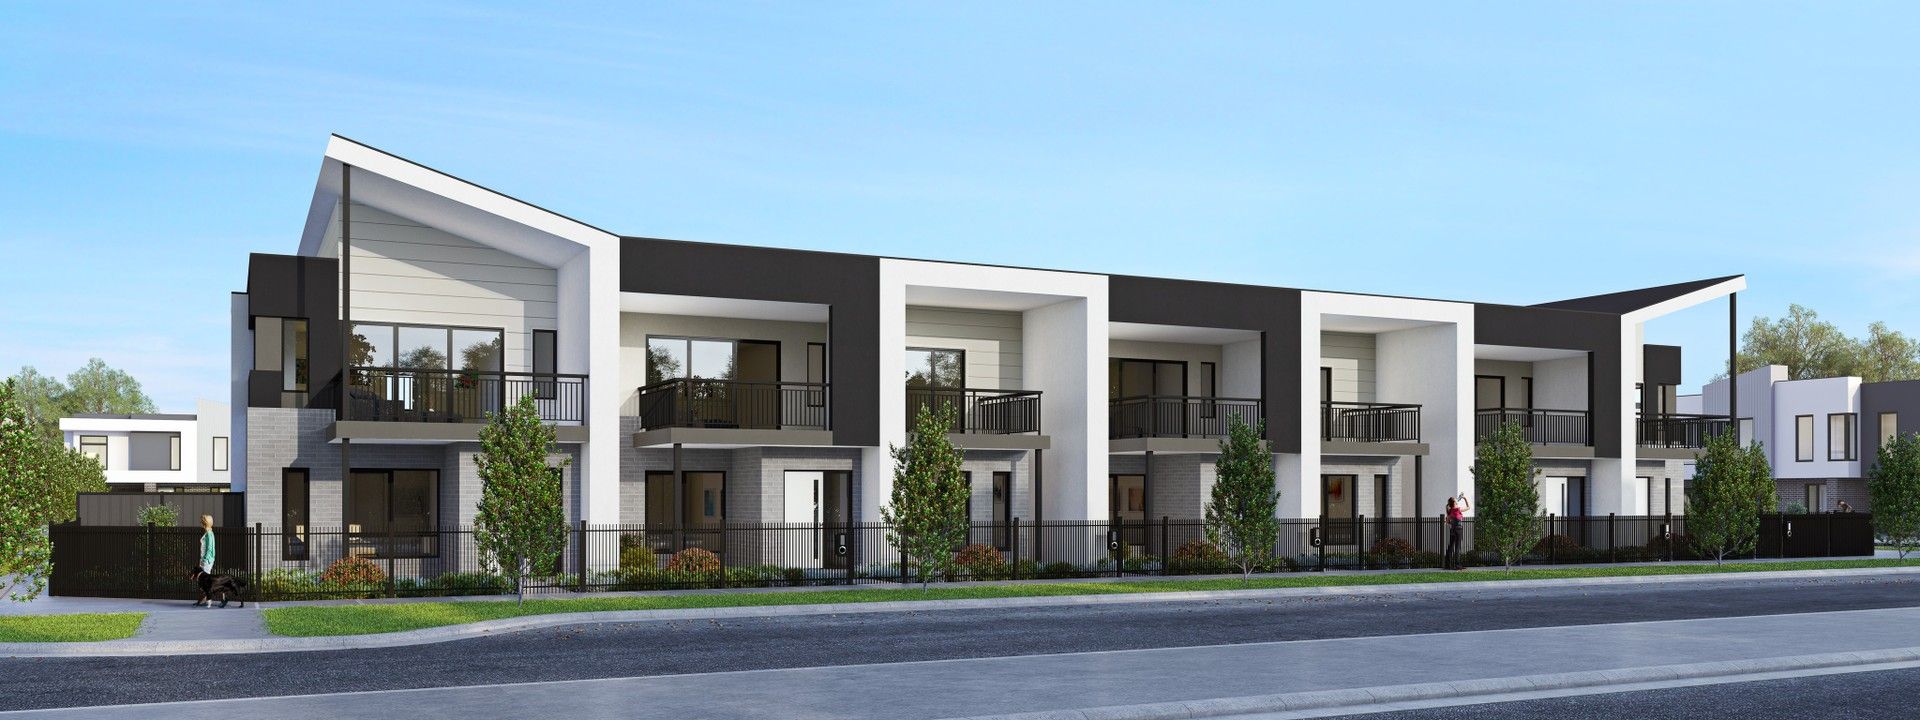 Parkville Corner Townhome by Metricon Homes, Kalkallo VIC 3064, Image 0